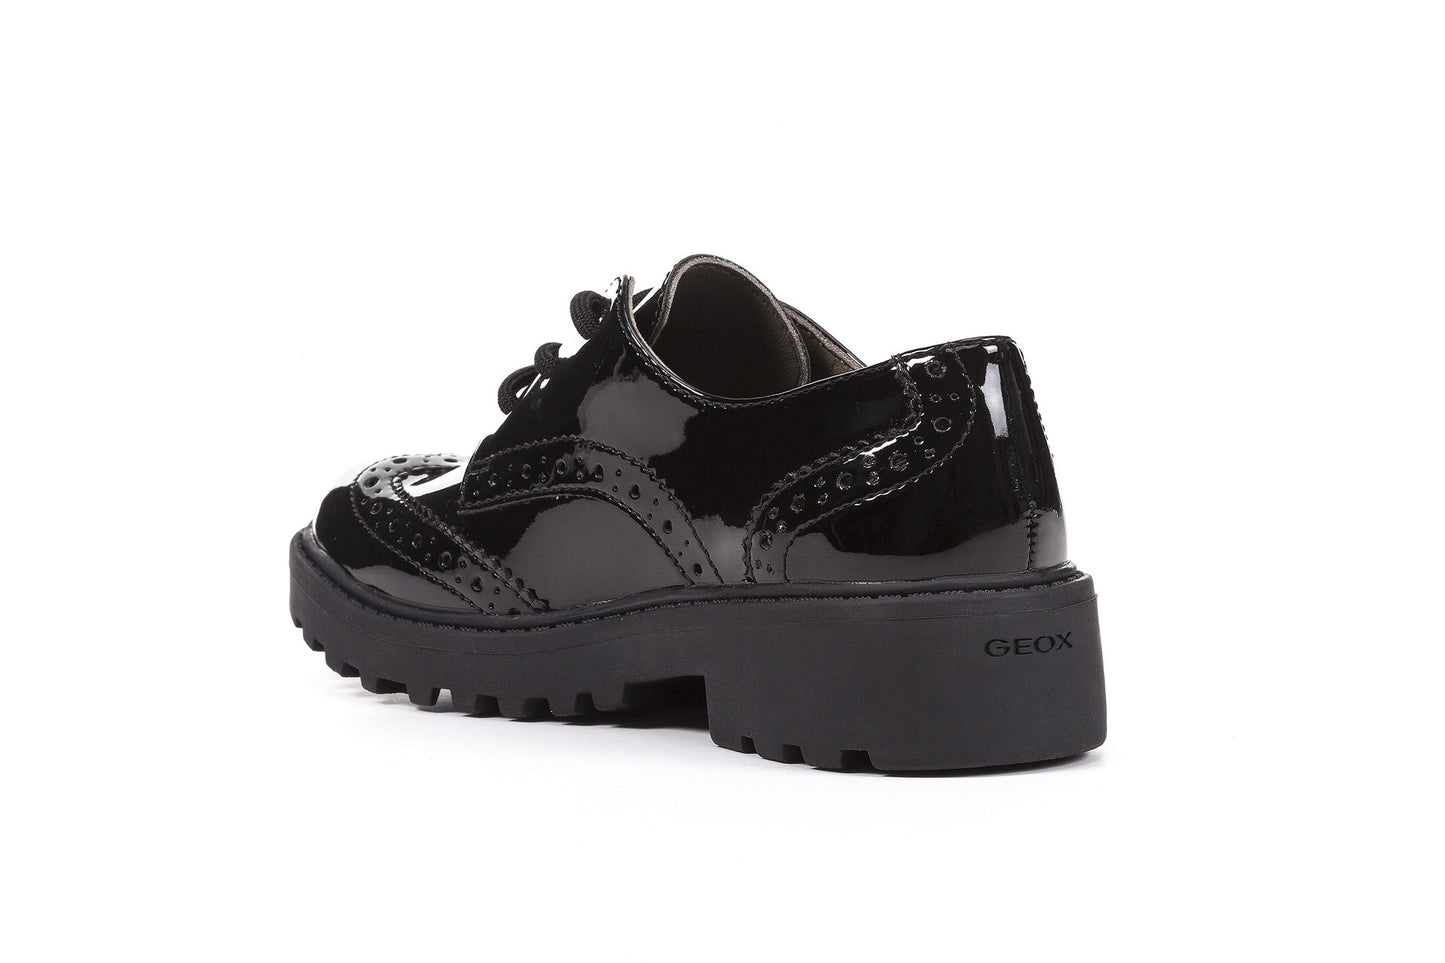 Casey Lace-Up Patent Girl's School Shoe